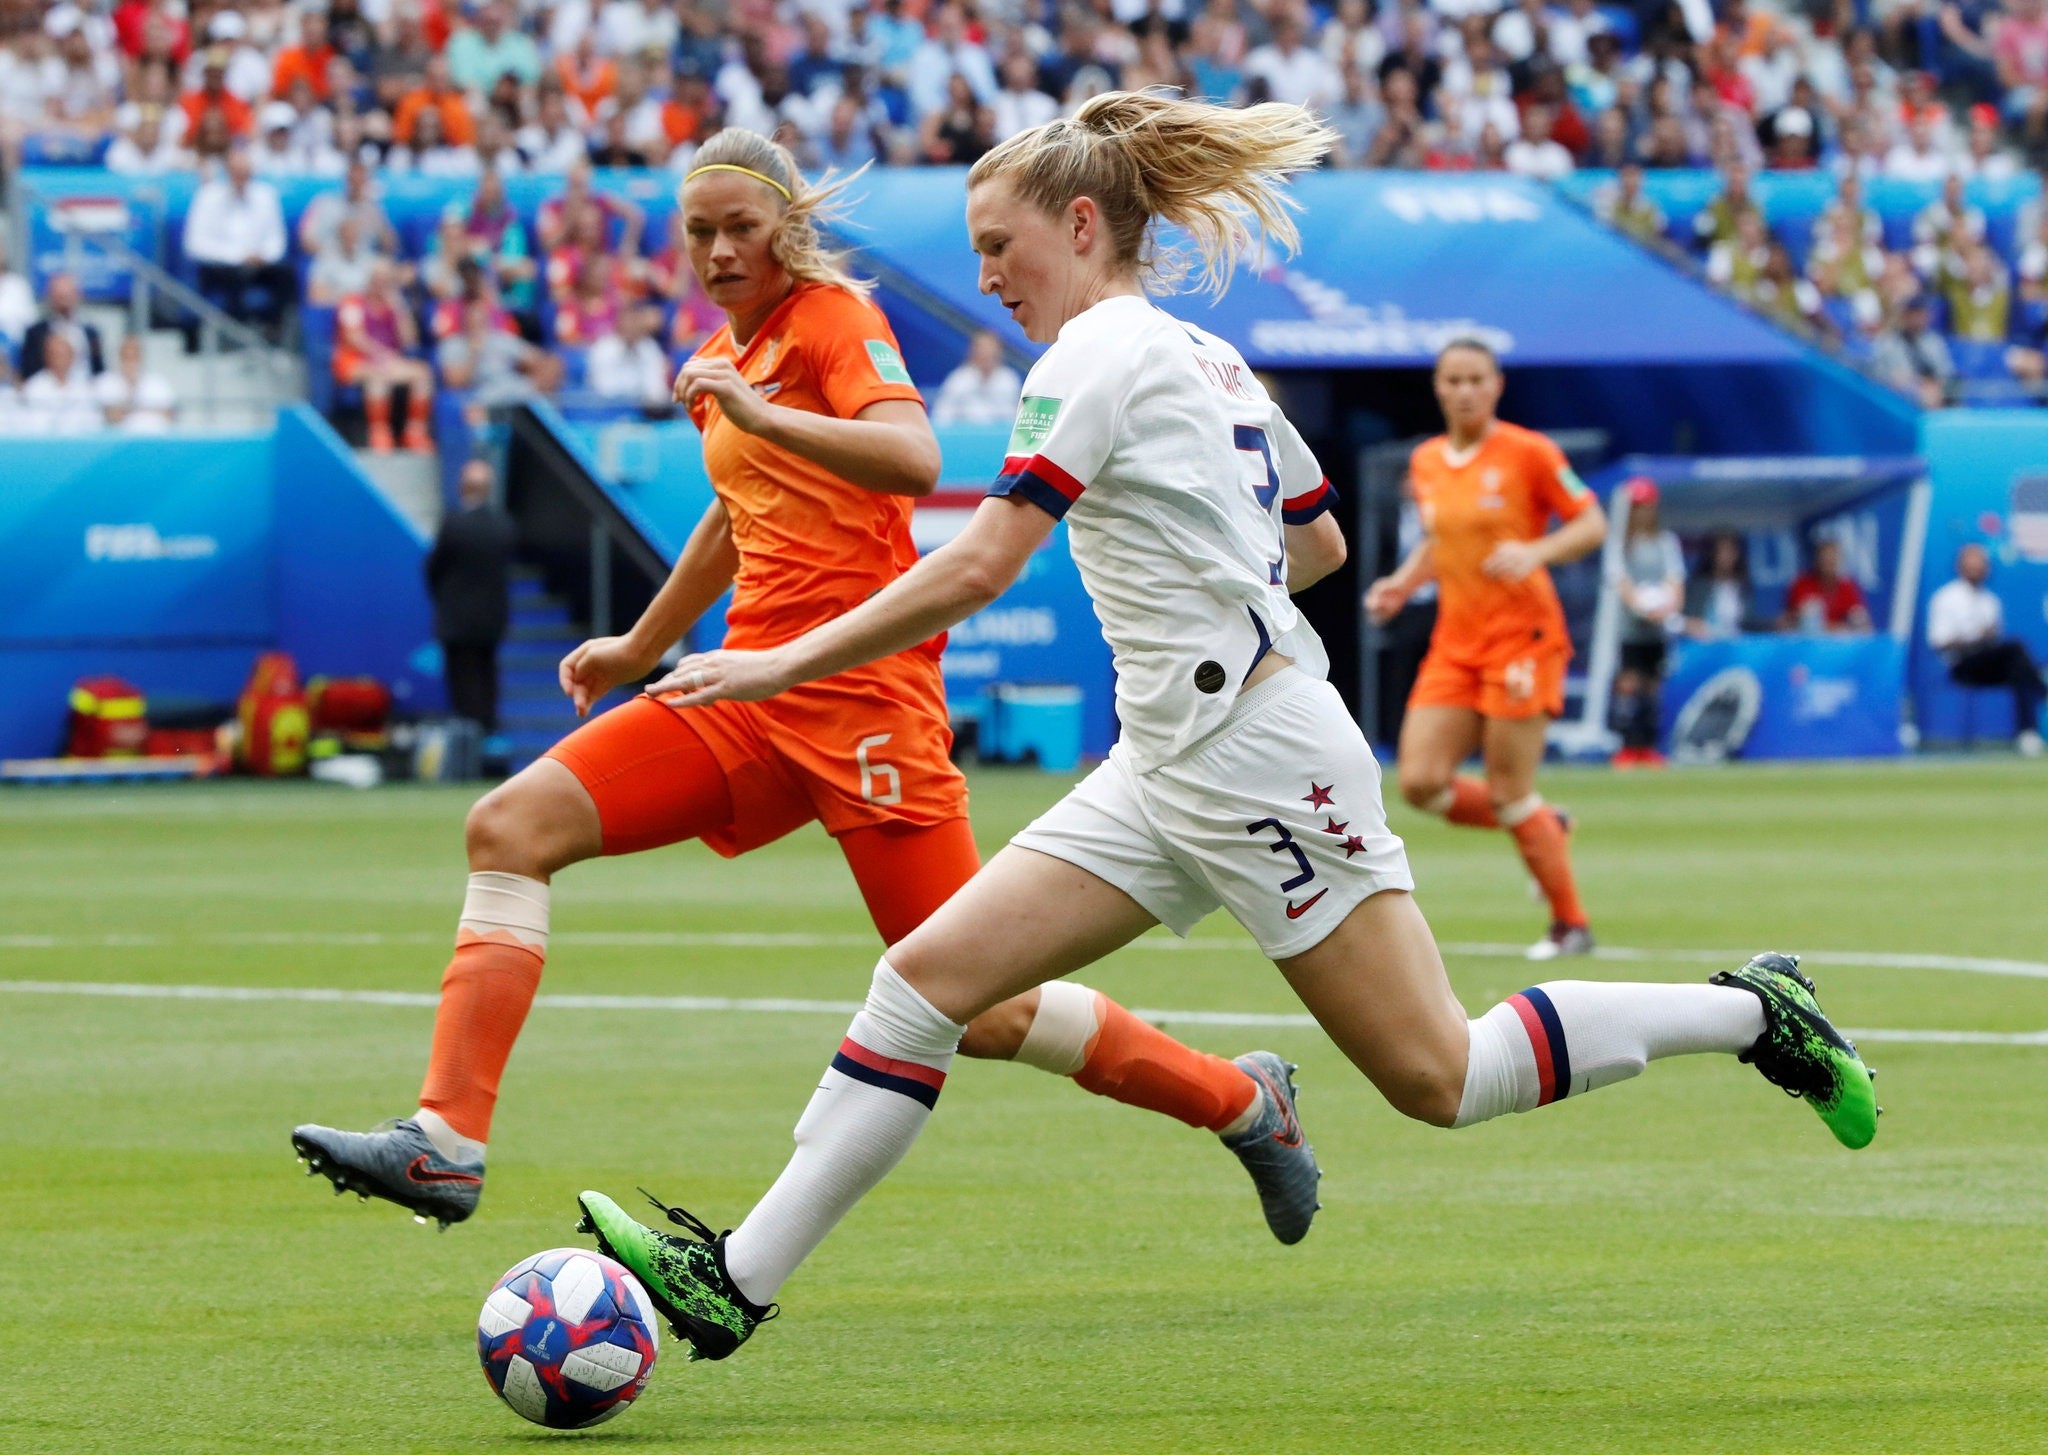 U S A Vs Netherlands Live Score From The Women S World Cup Final